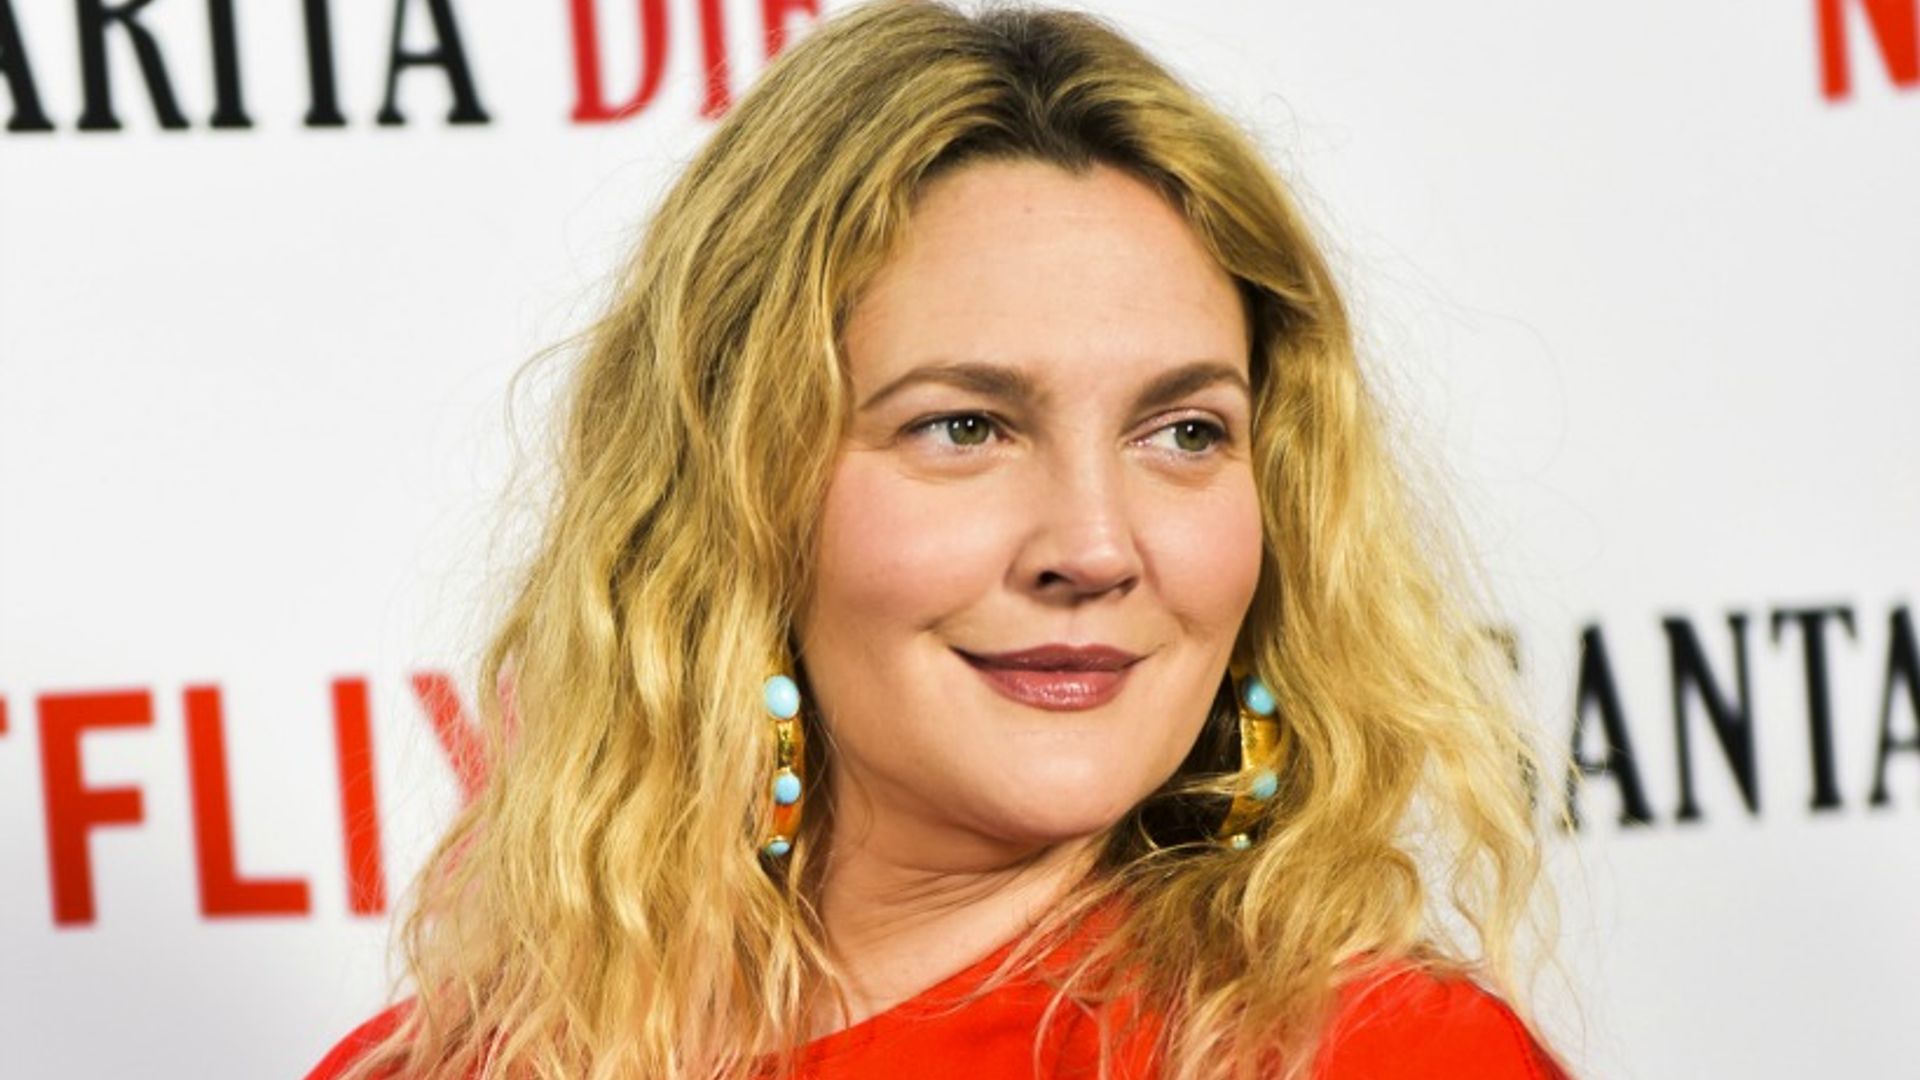 Drew Barrymore credits THIS treatment for solving her bleached hair woes